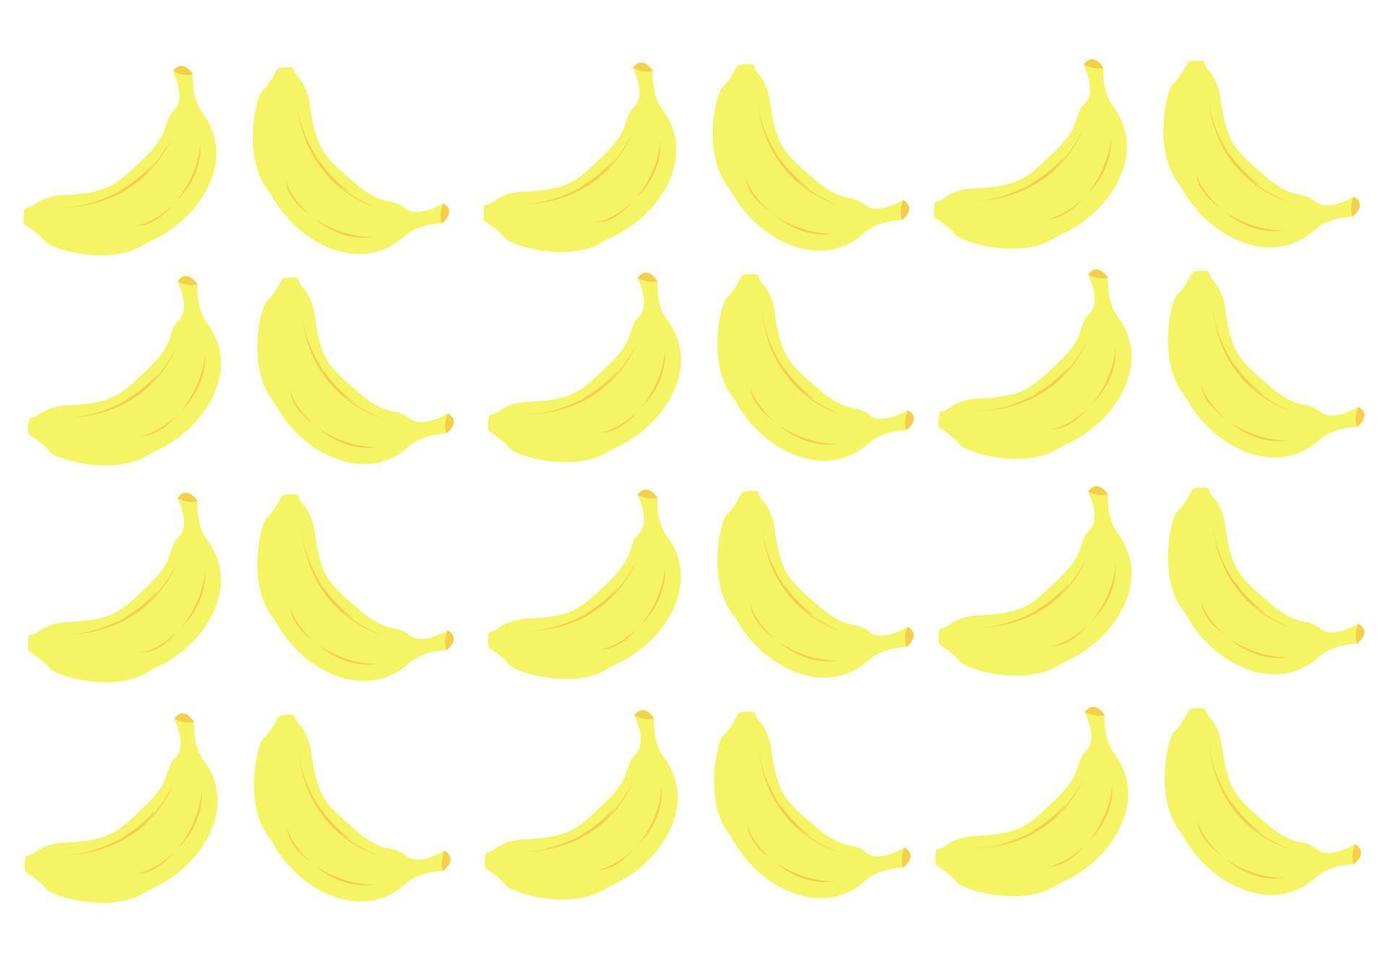 banana pattern with a bright yellow color vector